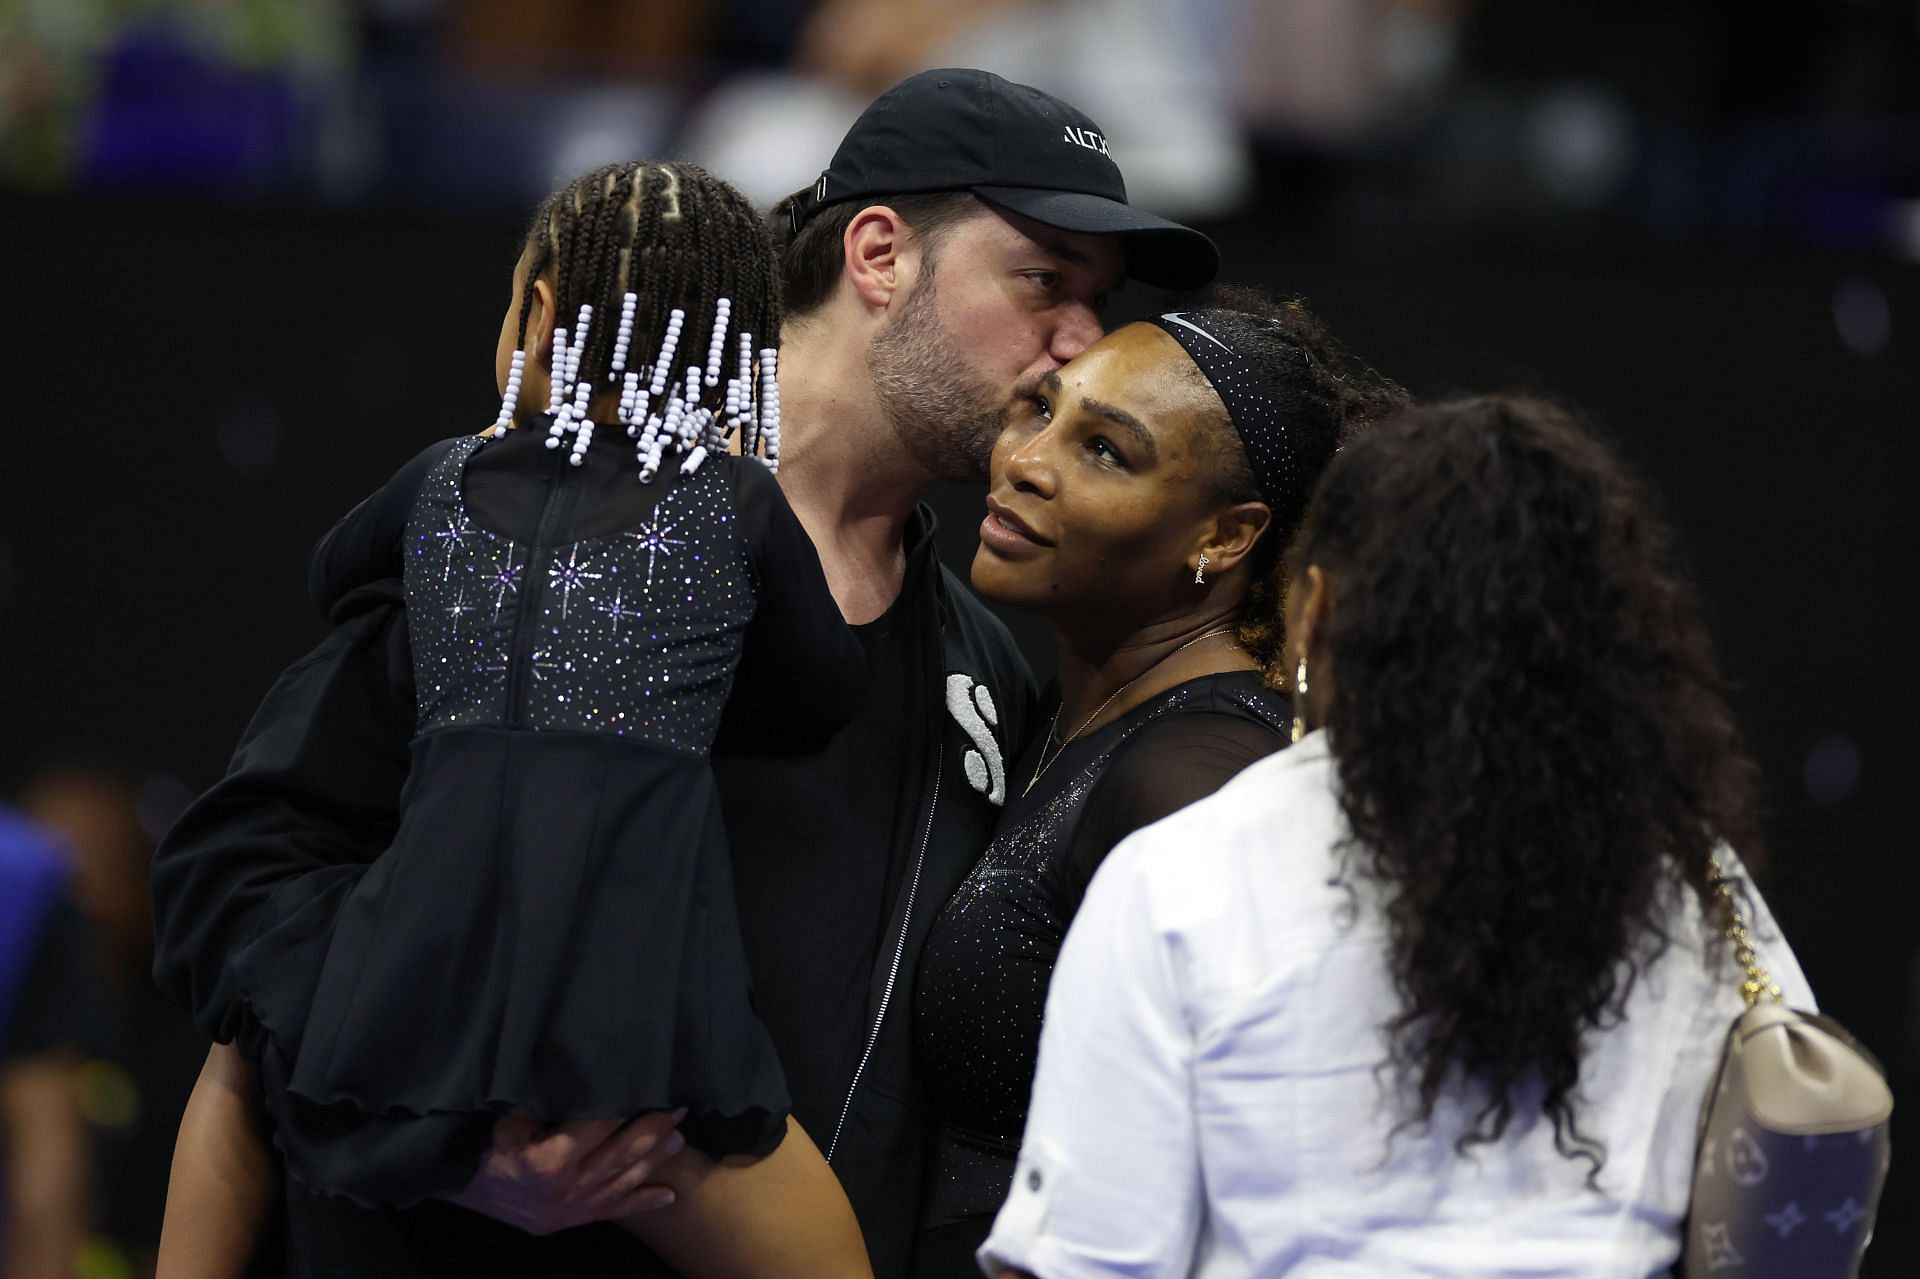 Williams with her husband Alexis Ohanian at the 2022 US Open